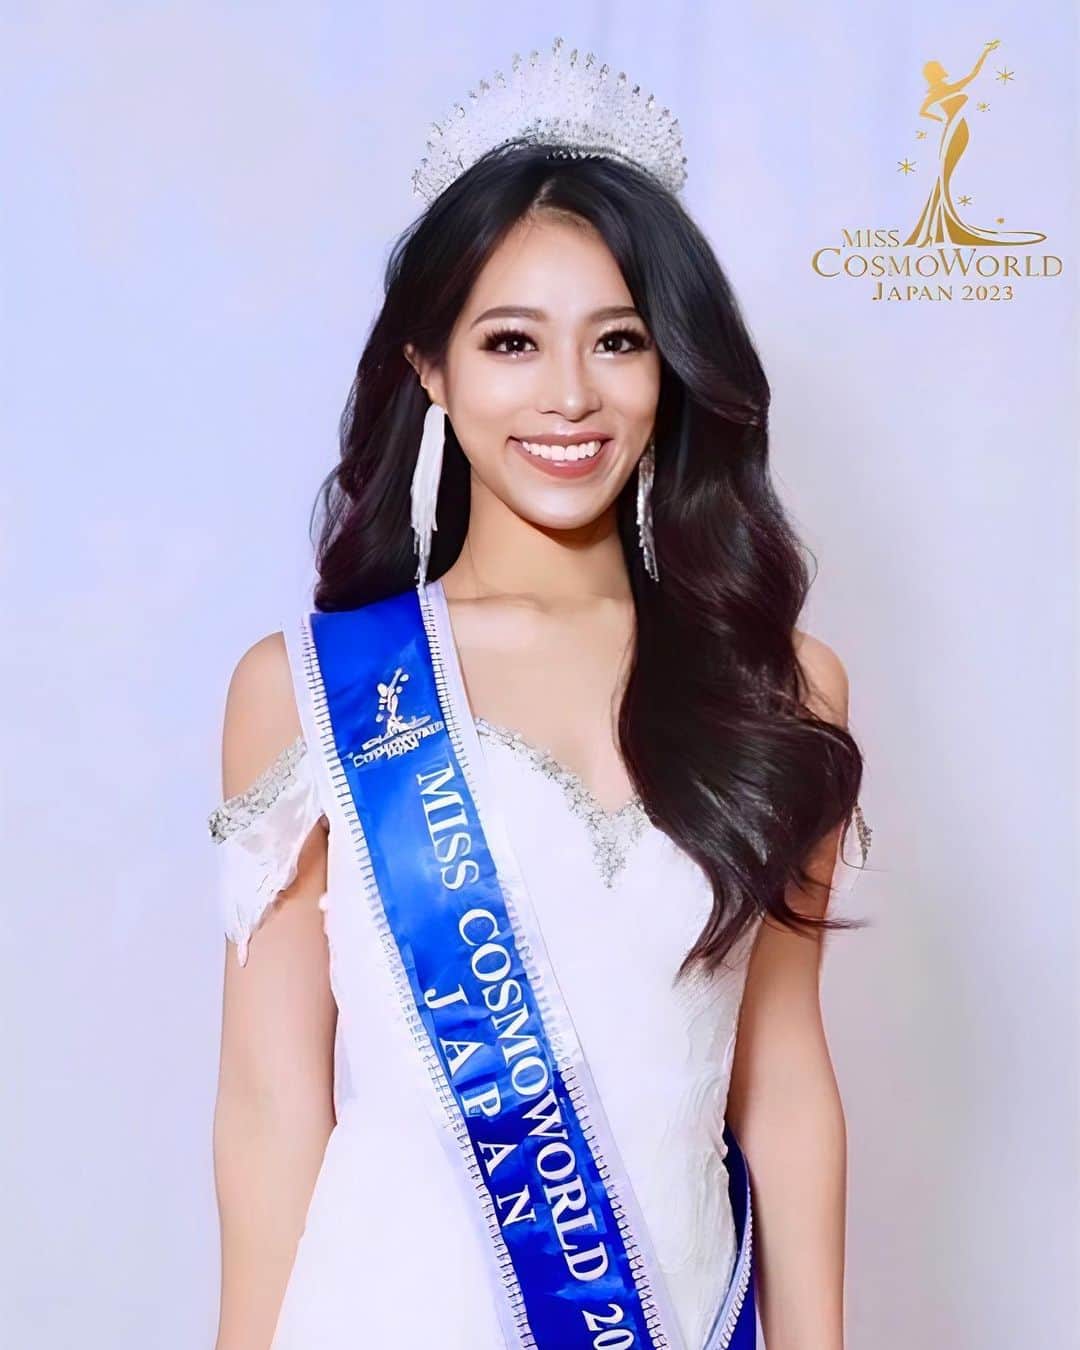 絹野志朋のインスタグラム：「Repost from @misscosmoworld  . 🌸Official Announcement🌸  2023 Miss Cosmo World Japan is Shiho Kinuno. @shihok0414 Congratulations🎉🎉  Shiho Kinuno, the Japanese representative for the Miss Cosmo World world competition in Malaysia.  Shiho is a graduate of Kobe University and has a strong command of English. She recently stayed in Cebu Island for a short study program to further improve her language skills. Shiho is a dynamic and outgoing individual who loves connecting with people and exudes positive energy.  We kindly request your support and encouragement for her participation in the competition. With your help, we believe Shiho can represent Japan with pride on the global stage.  Thank you for your ongoing support. To @misscosmoworld family and Founder of Miss Cosmo World @carrielee1212 Thank you for giving her special opportunity.  2023 ミスコスモワールド日本代表の栄冠に輝いたのは 絹野志朋さん✨おめでとうございます🎉  絹野さんは11月中旬からミスコスモワールド開催国マレーシアに滞在し、11月29日グランドファイナルのステージに立ちます。 絹野さんは神戸大学卒。高い英語力がありながら更なる自己研磨のため先日まで短期留学のためセブ島に滞在。 行動力があり、人と関わることが大好きなエネルギー溢れる女性です。皆様の応援をよろしくお願い致します🎊  Miss Cosmo World Japan @misscosmoworldjapan   Support team @japan_beauty_ambassador  Miss Cosmo World Japan National Director Founder of Japan Beauty Ambassador  @aya_kiyota . . #ミスコスモワールド #ミスコスモワールドジャパン #ミスコン日本代表#ミスコン世界大会 #ジャパンビューティーアンバサダー # 絹野志朋 #モデル #リポーター #神戸大学 #富山#マレーシア#マレーシア観光 #misscosmoworld #misscosmoworldjapan #beautypageant #malaysia #japan #k| #osaka #kobe #kobeuniversity #challenge #passion」